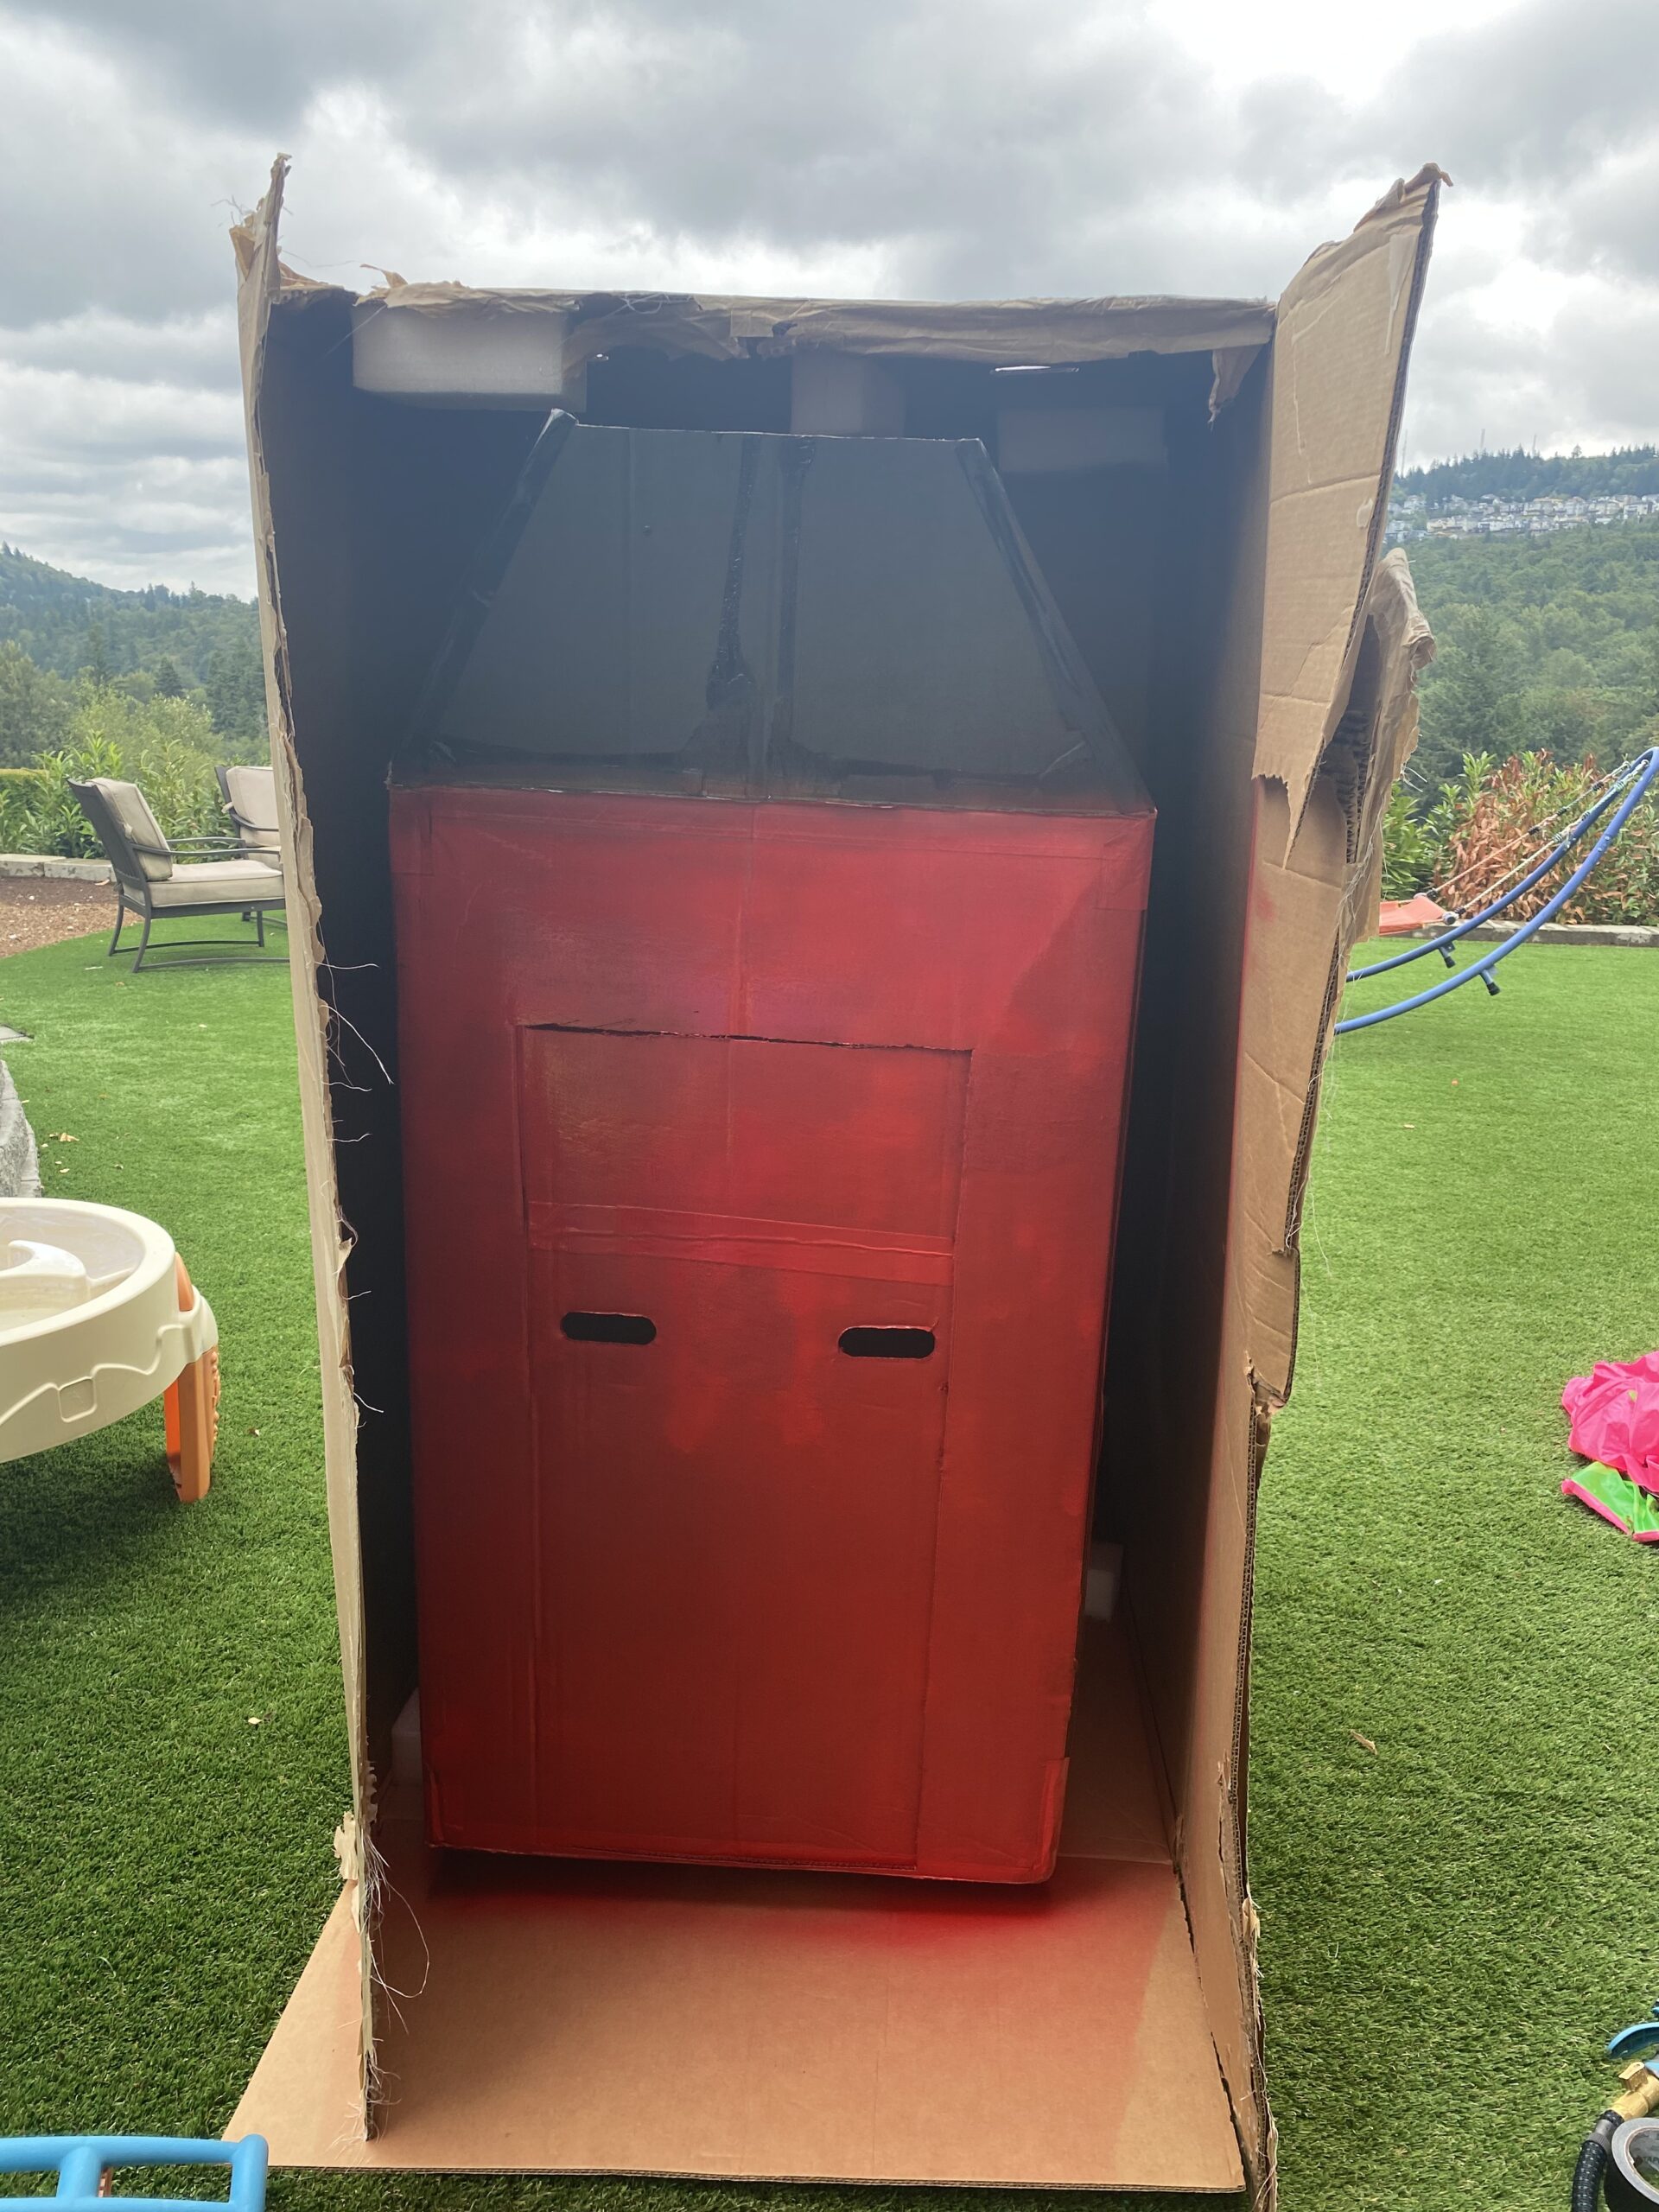 I started out by using spray paint in red and black but due to the smell, I had to keep creating outside.  It started to rain and so I tried to hide our large Barn box inside of another large box.  The spray paint didn’t cover all of the black ink so I switched to using acrylic paint. 